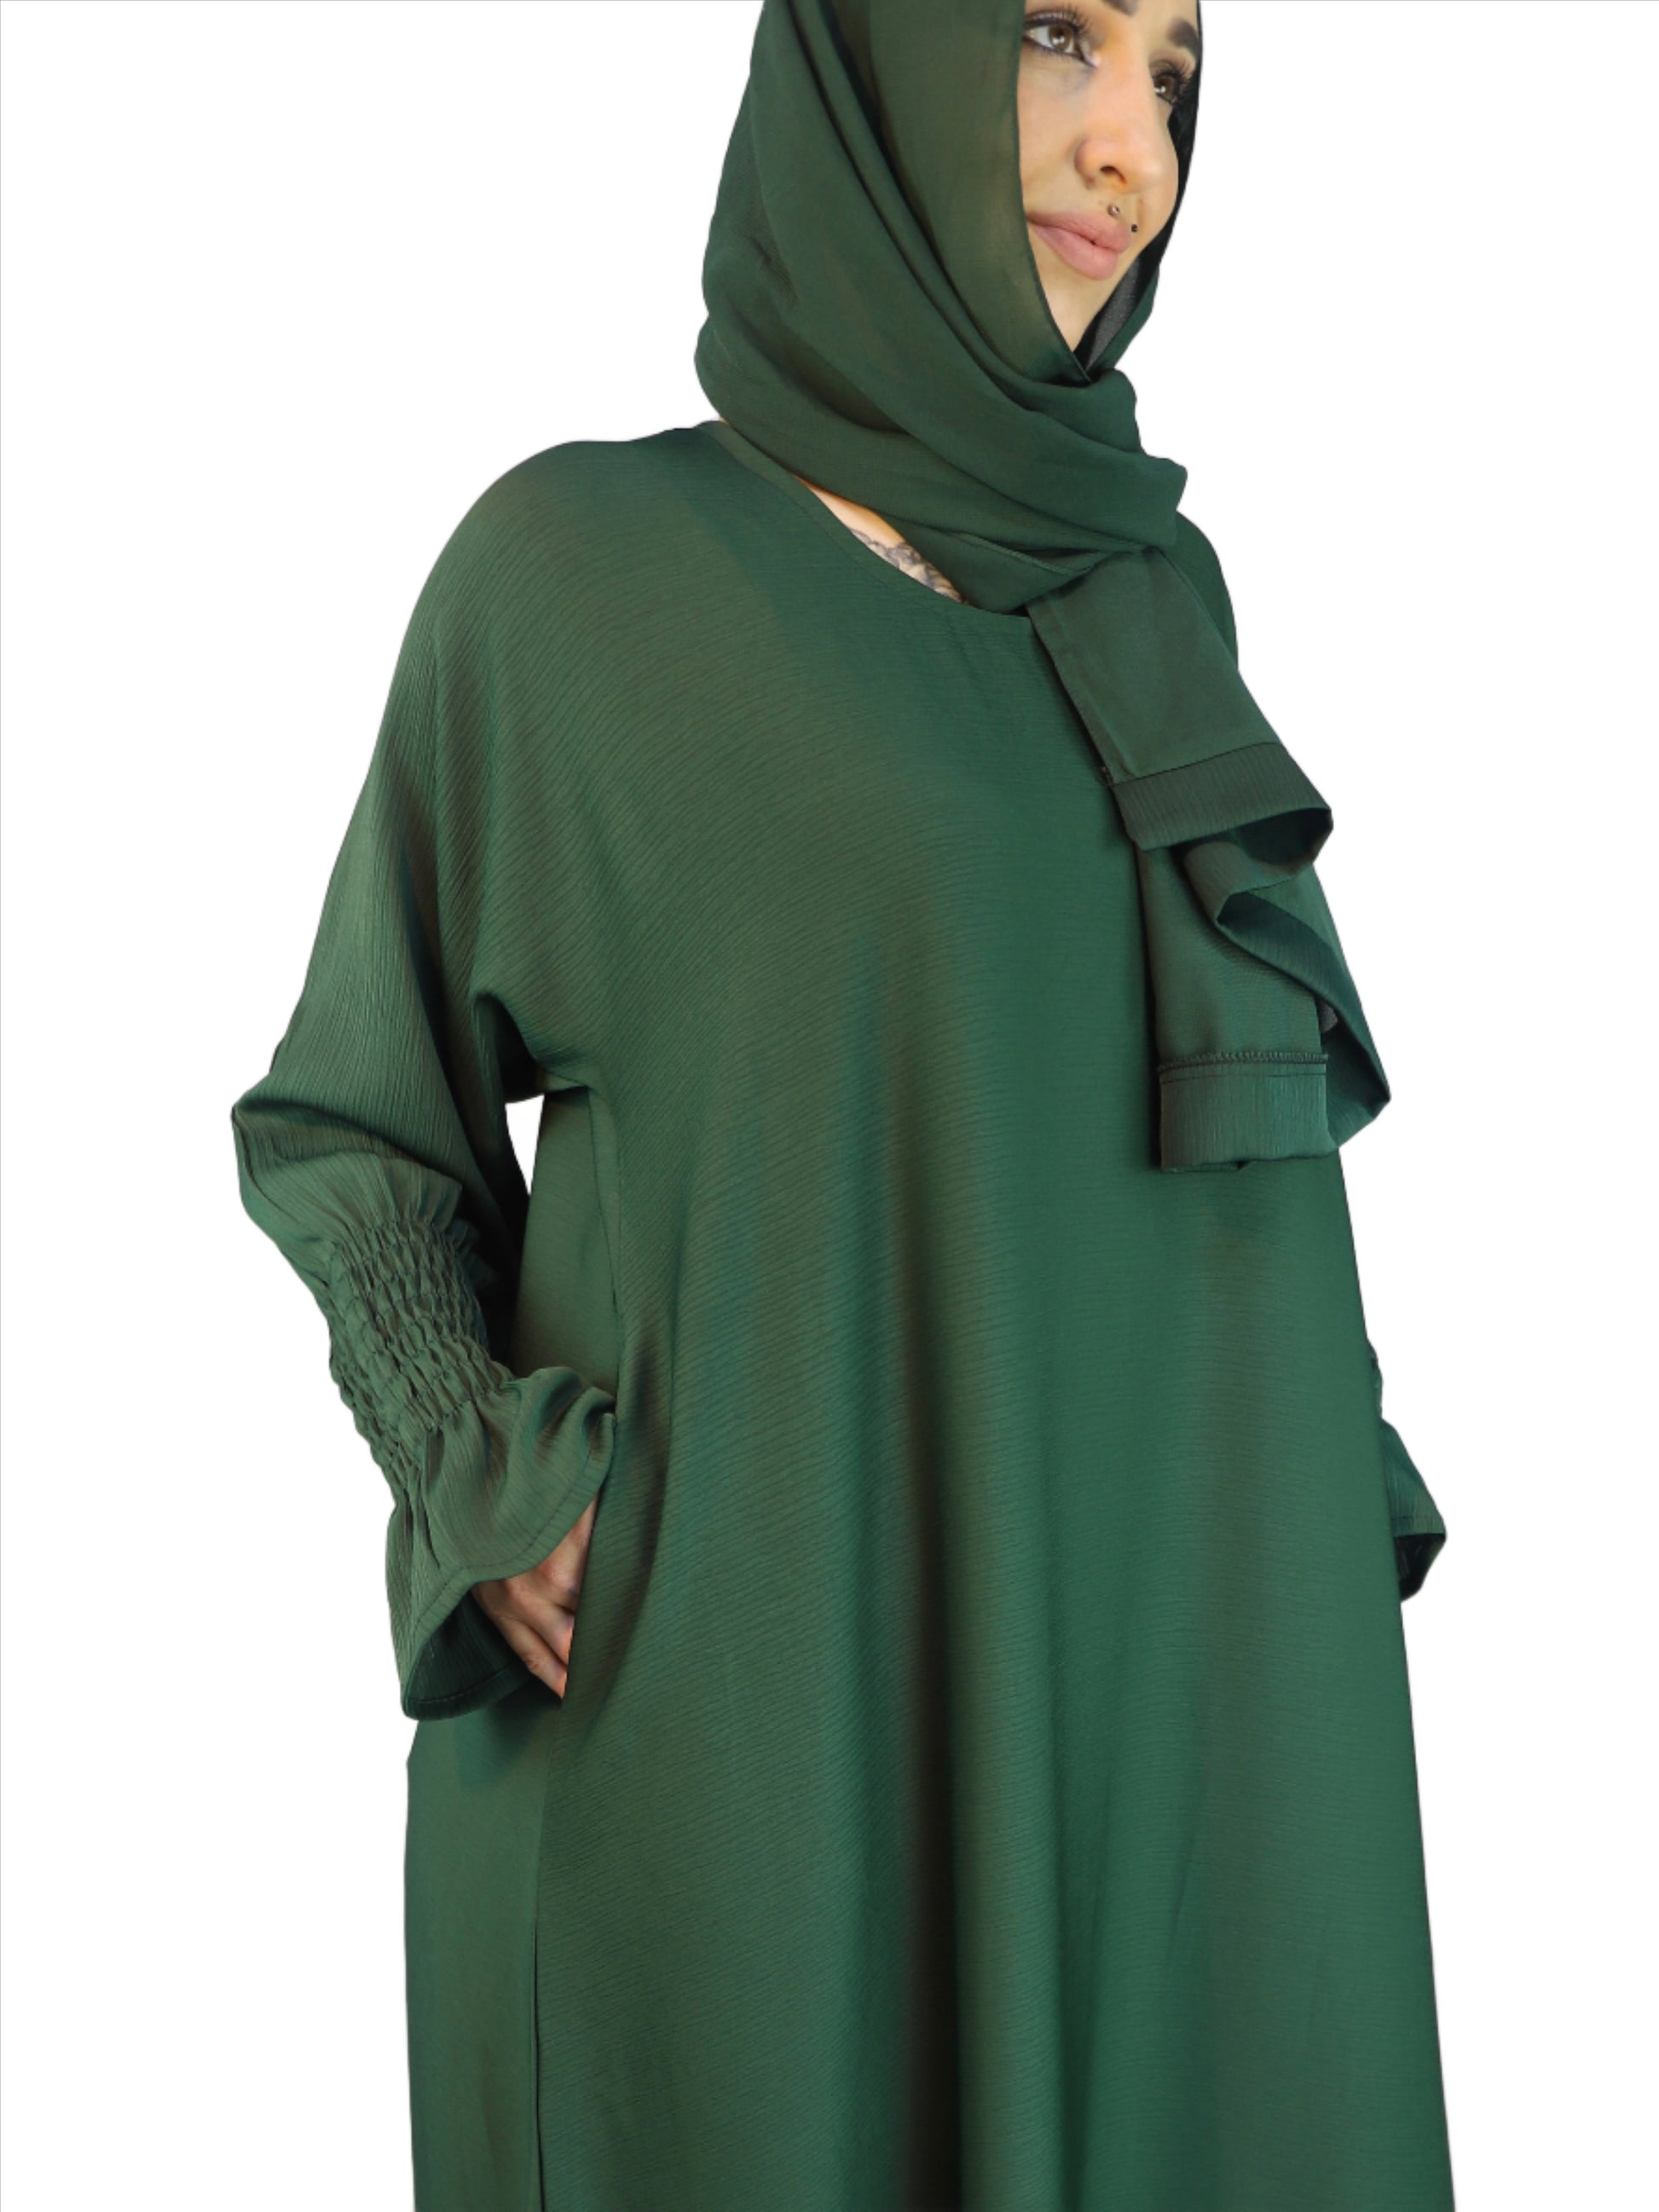 Modest Dress For Women Zoom Material Abaya With Elasticated Sleeves 